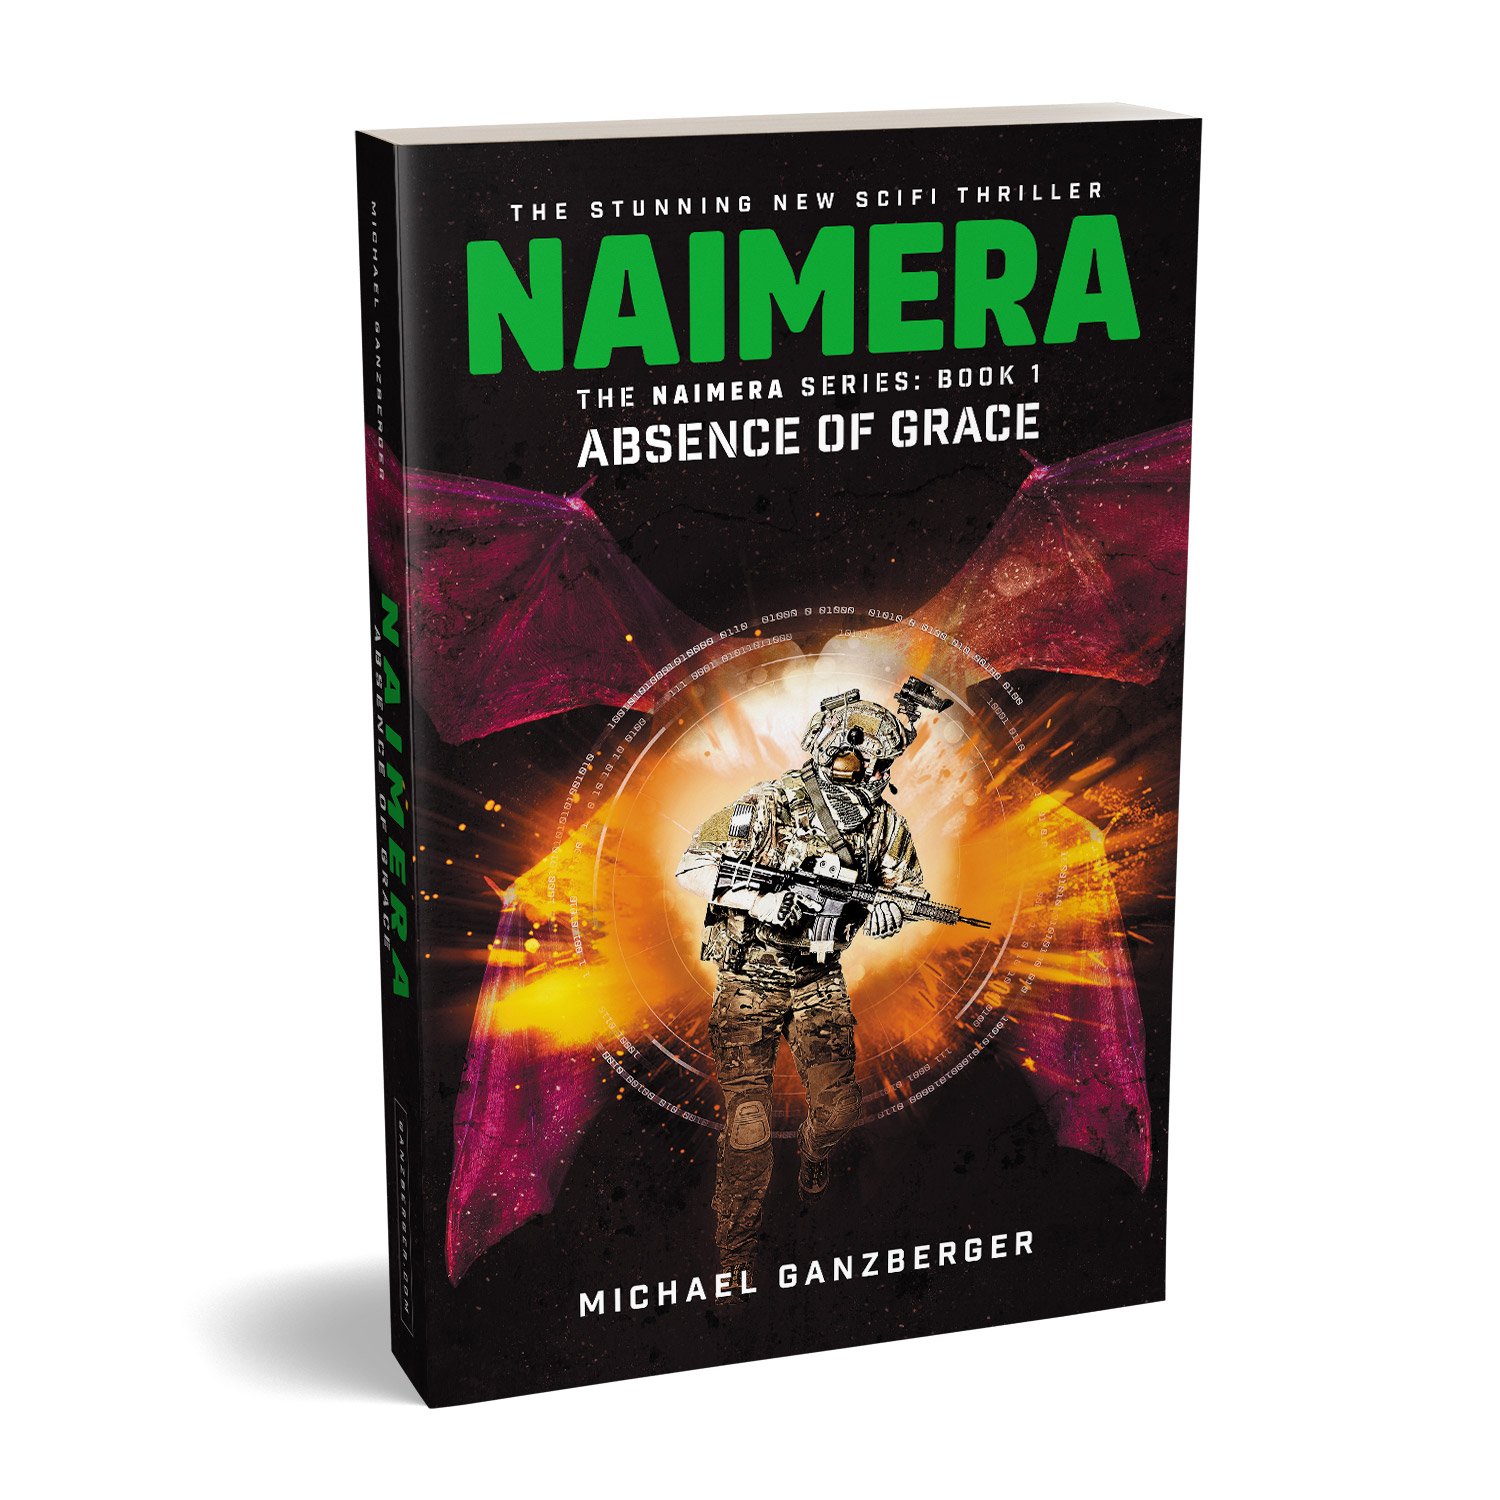 'NAIMERA' is groovy military scifi thriller. The author is Michael Ganzberger. The book cover design and interior formatting are by Mark Thomas. To learn more about what Mark could do for your book, please visit coverness.com